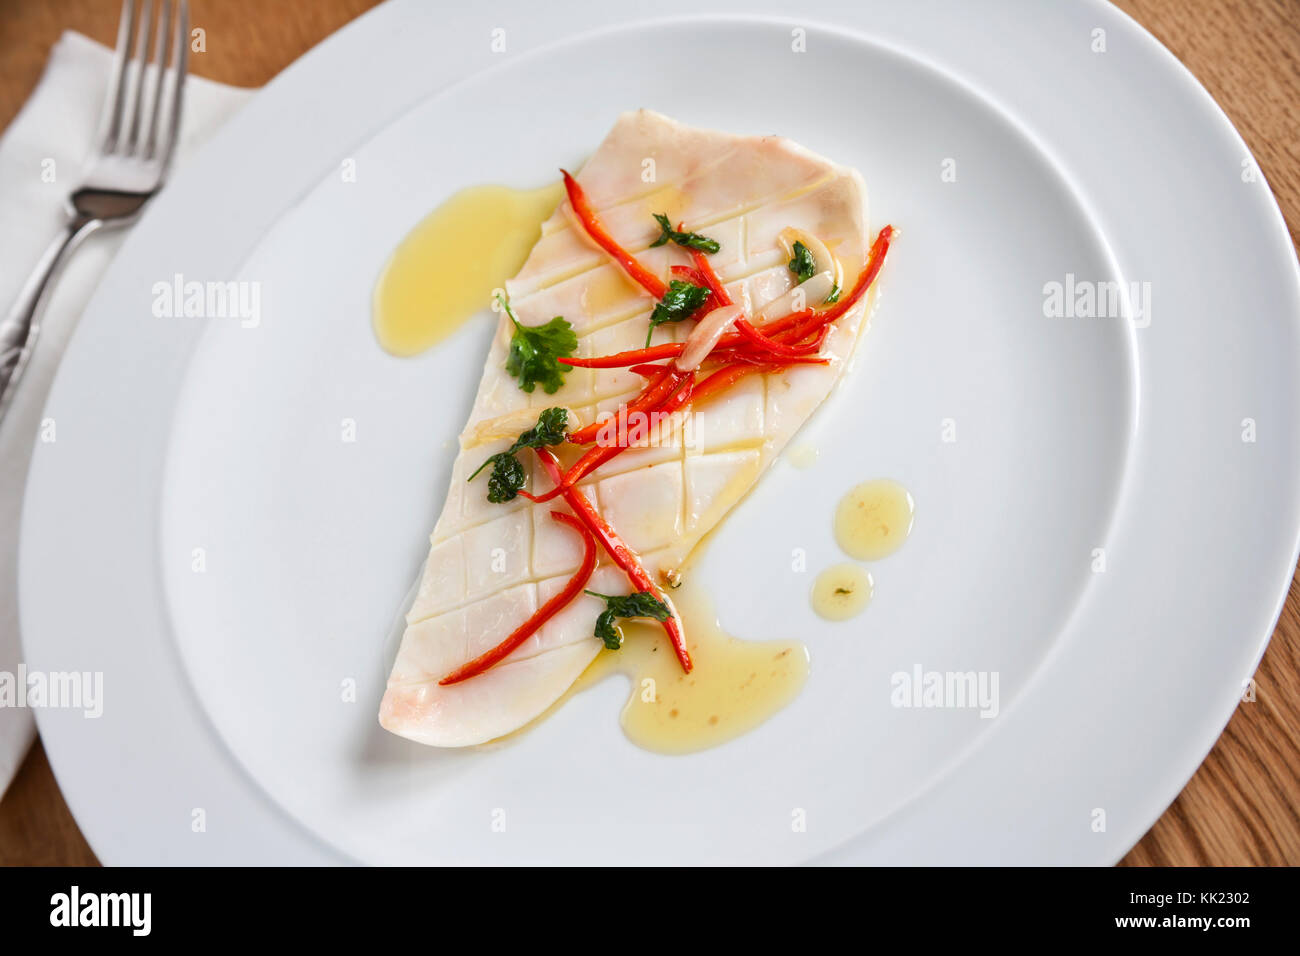 Cooked squid body envelope with red chilli and olive oil served on white plate Stock Photo